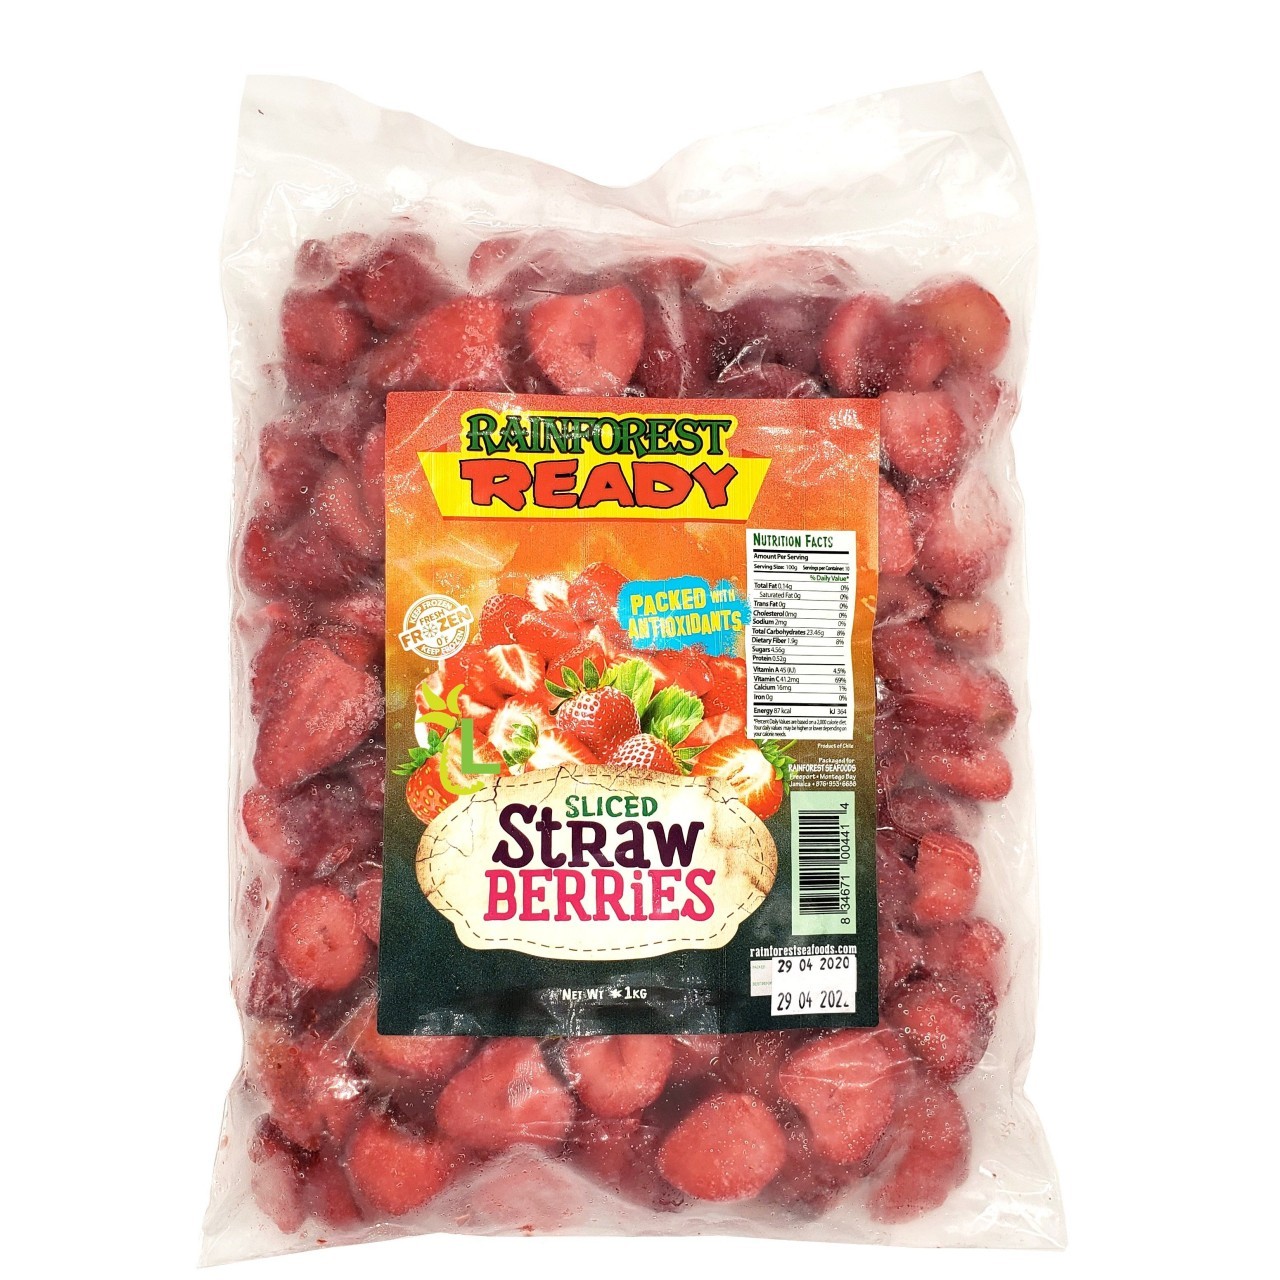 RAINFOREST SLICED STRAWBERRY 1KG (RE-SEALABLE)